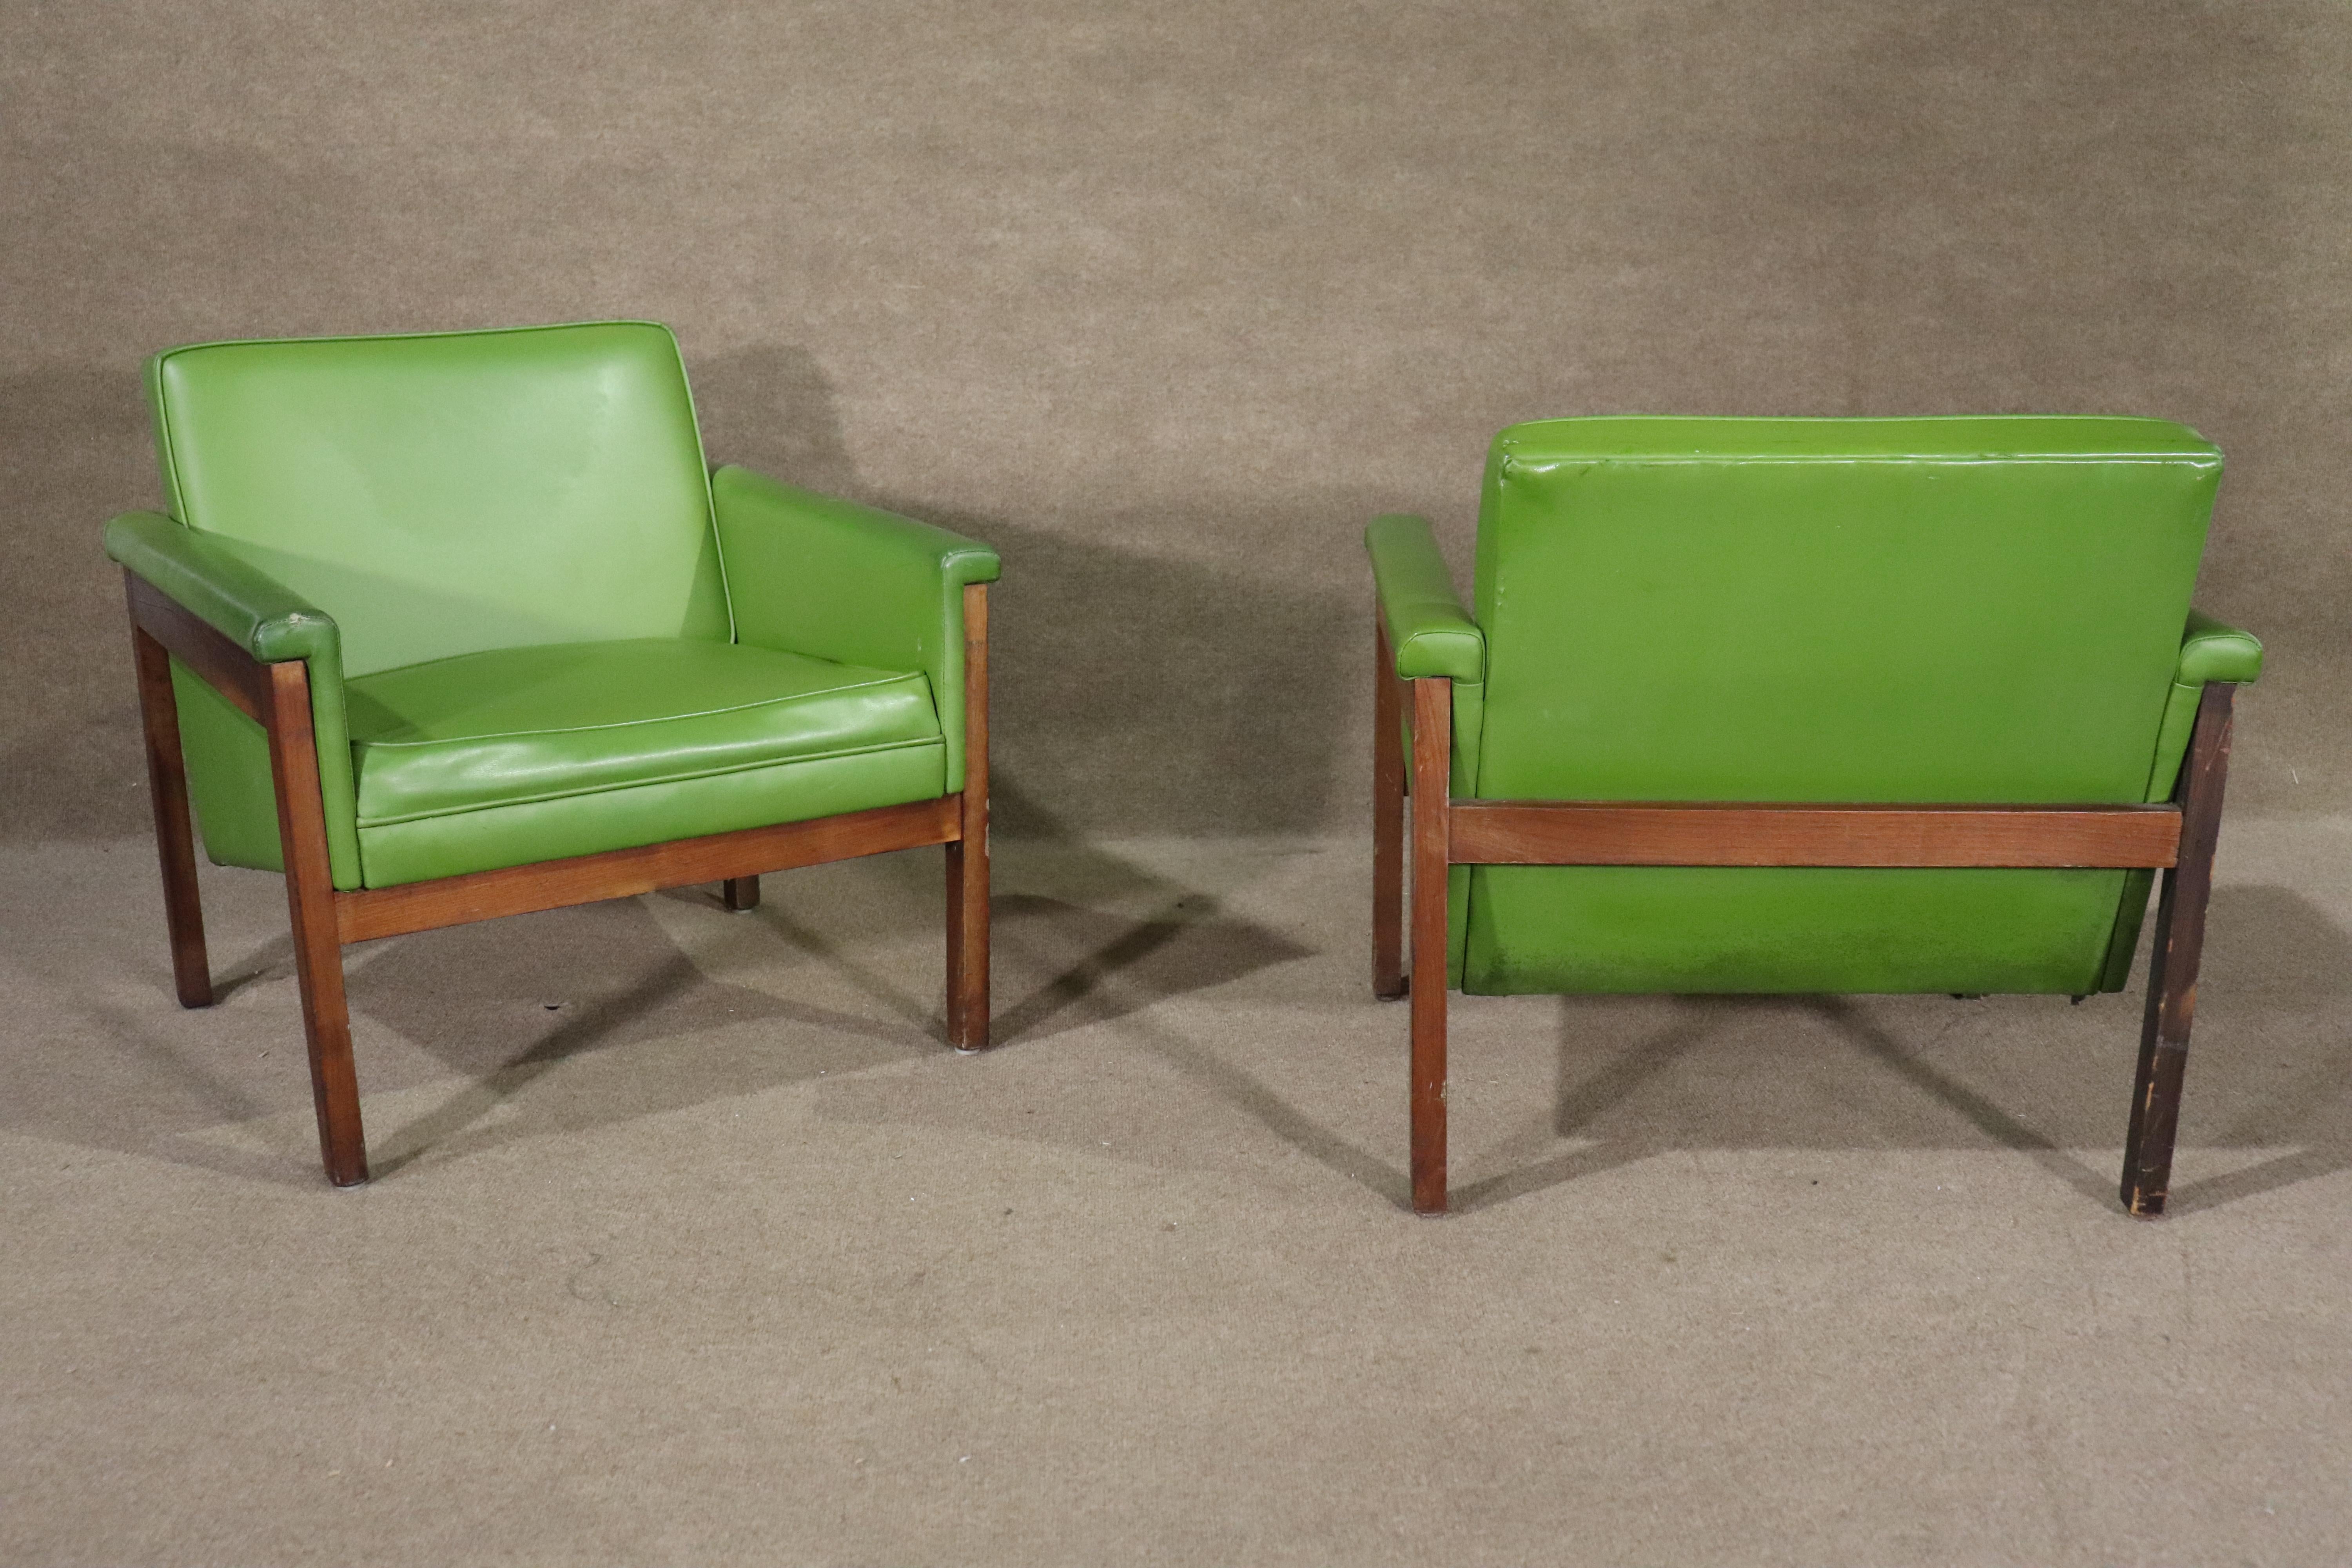 Pair of vintage modern office chairs with walnut wood frames. Handsome mid-century design for your living room.
Please confirm location NY or NJ